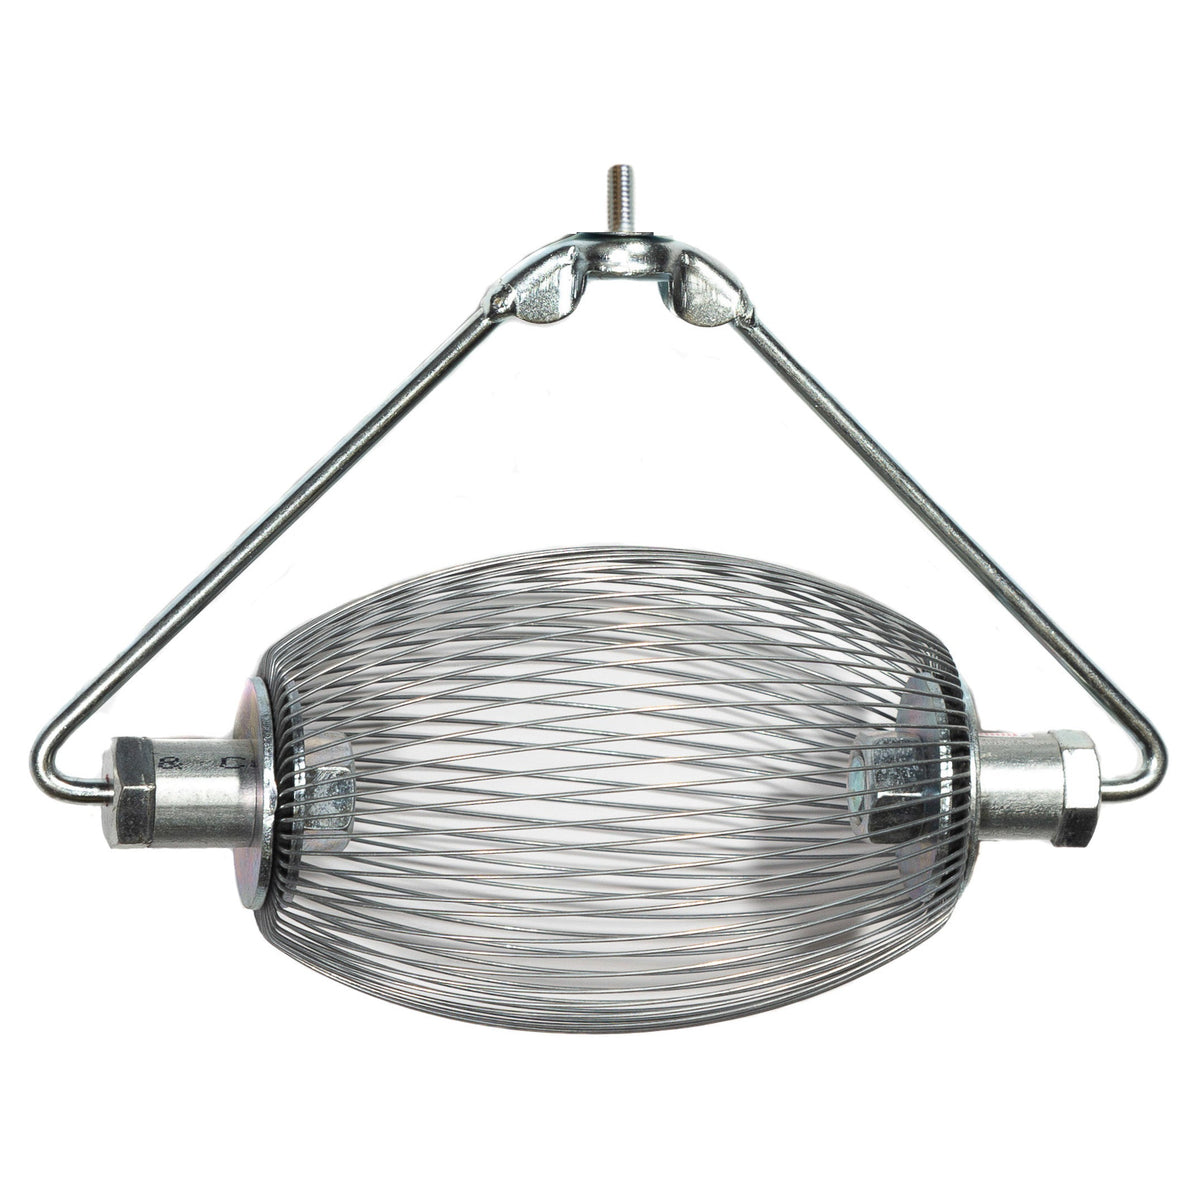 Factory Outlet - Basket Replacement for Nut Wizard